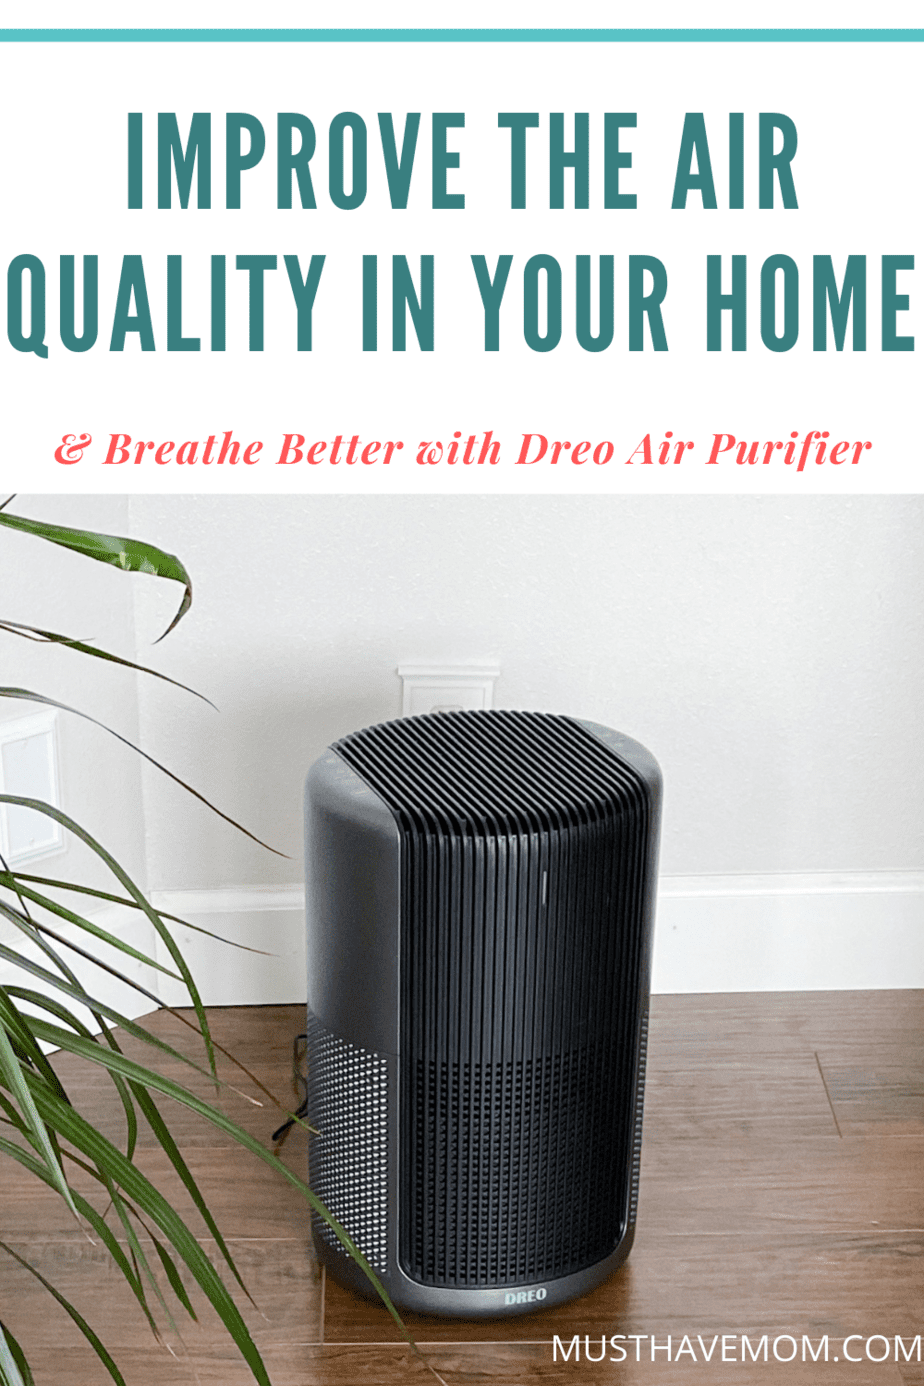 Improve the Air Quality in Your Home & Breathe Better with Dreo Air Purifier